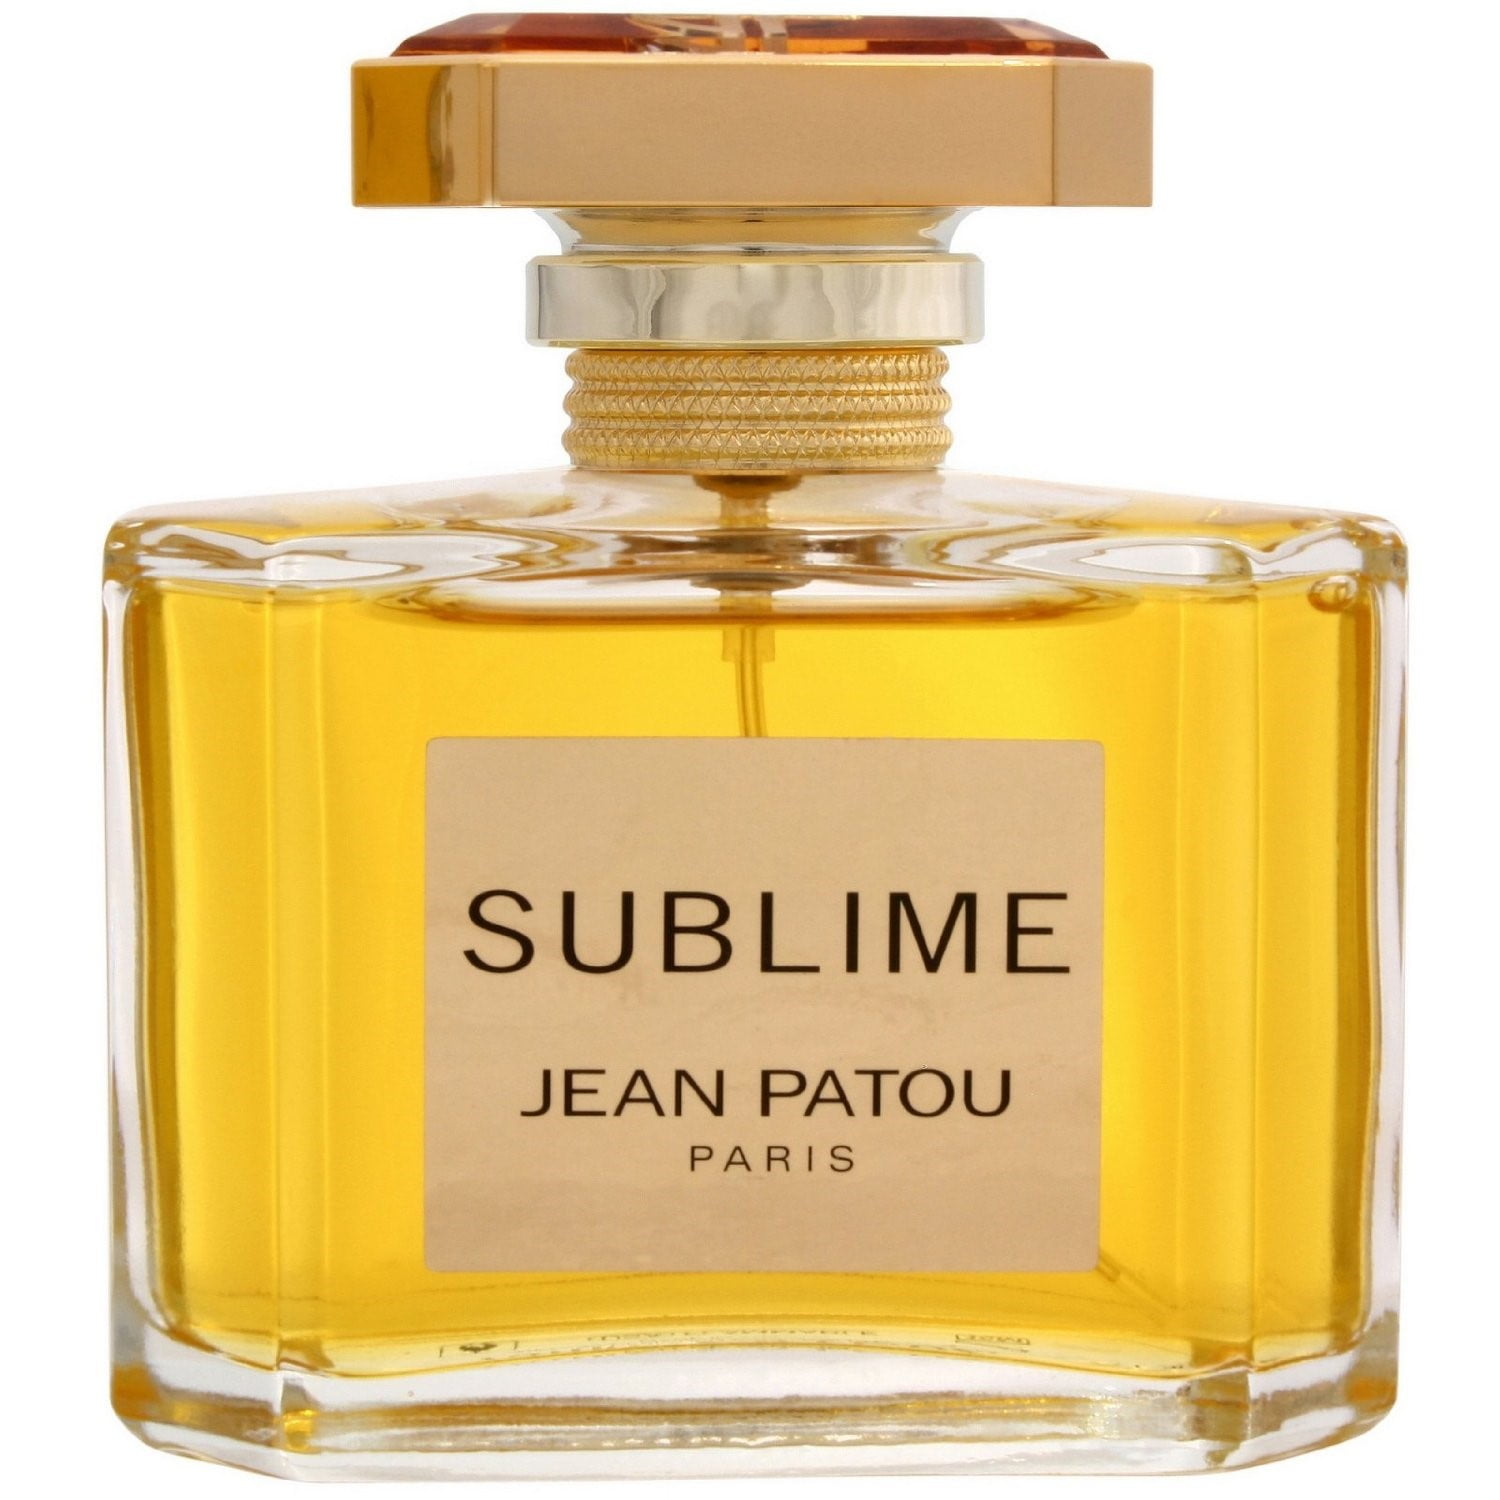 ghost Palace puppet New Item JEAN PATOU SUBLIME EDT SPRAY 1.7 OZ SUBLIME/JEAN PATOU EDT SPRAY  1.7 OZ (W) - Walmart.com